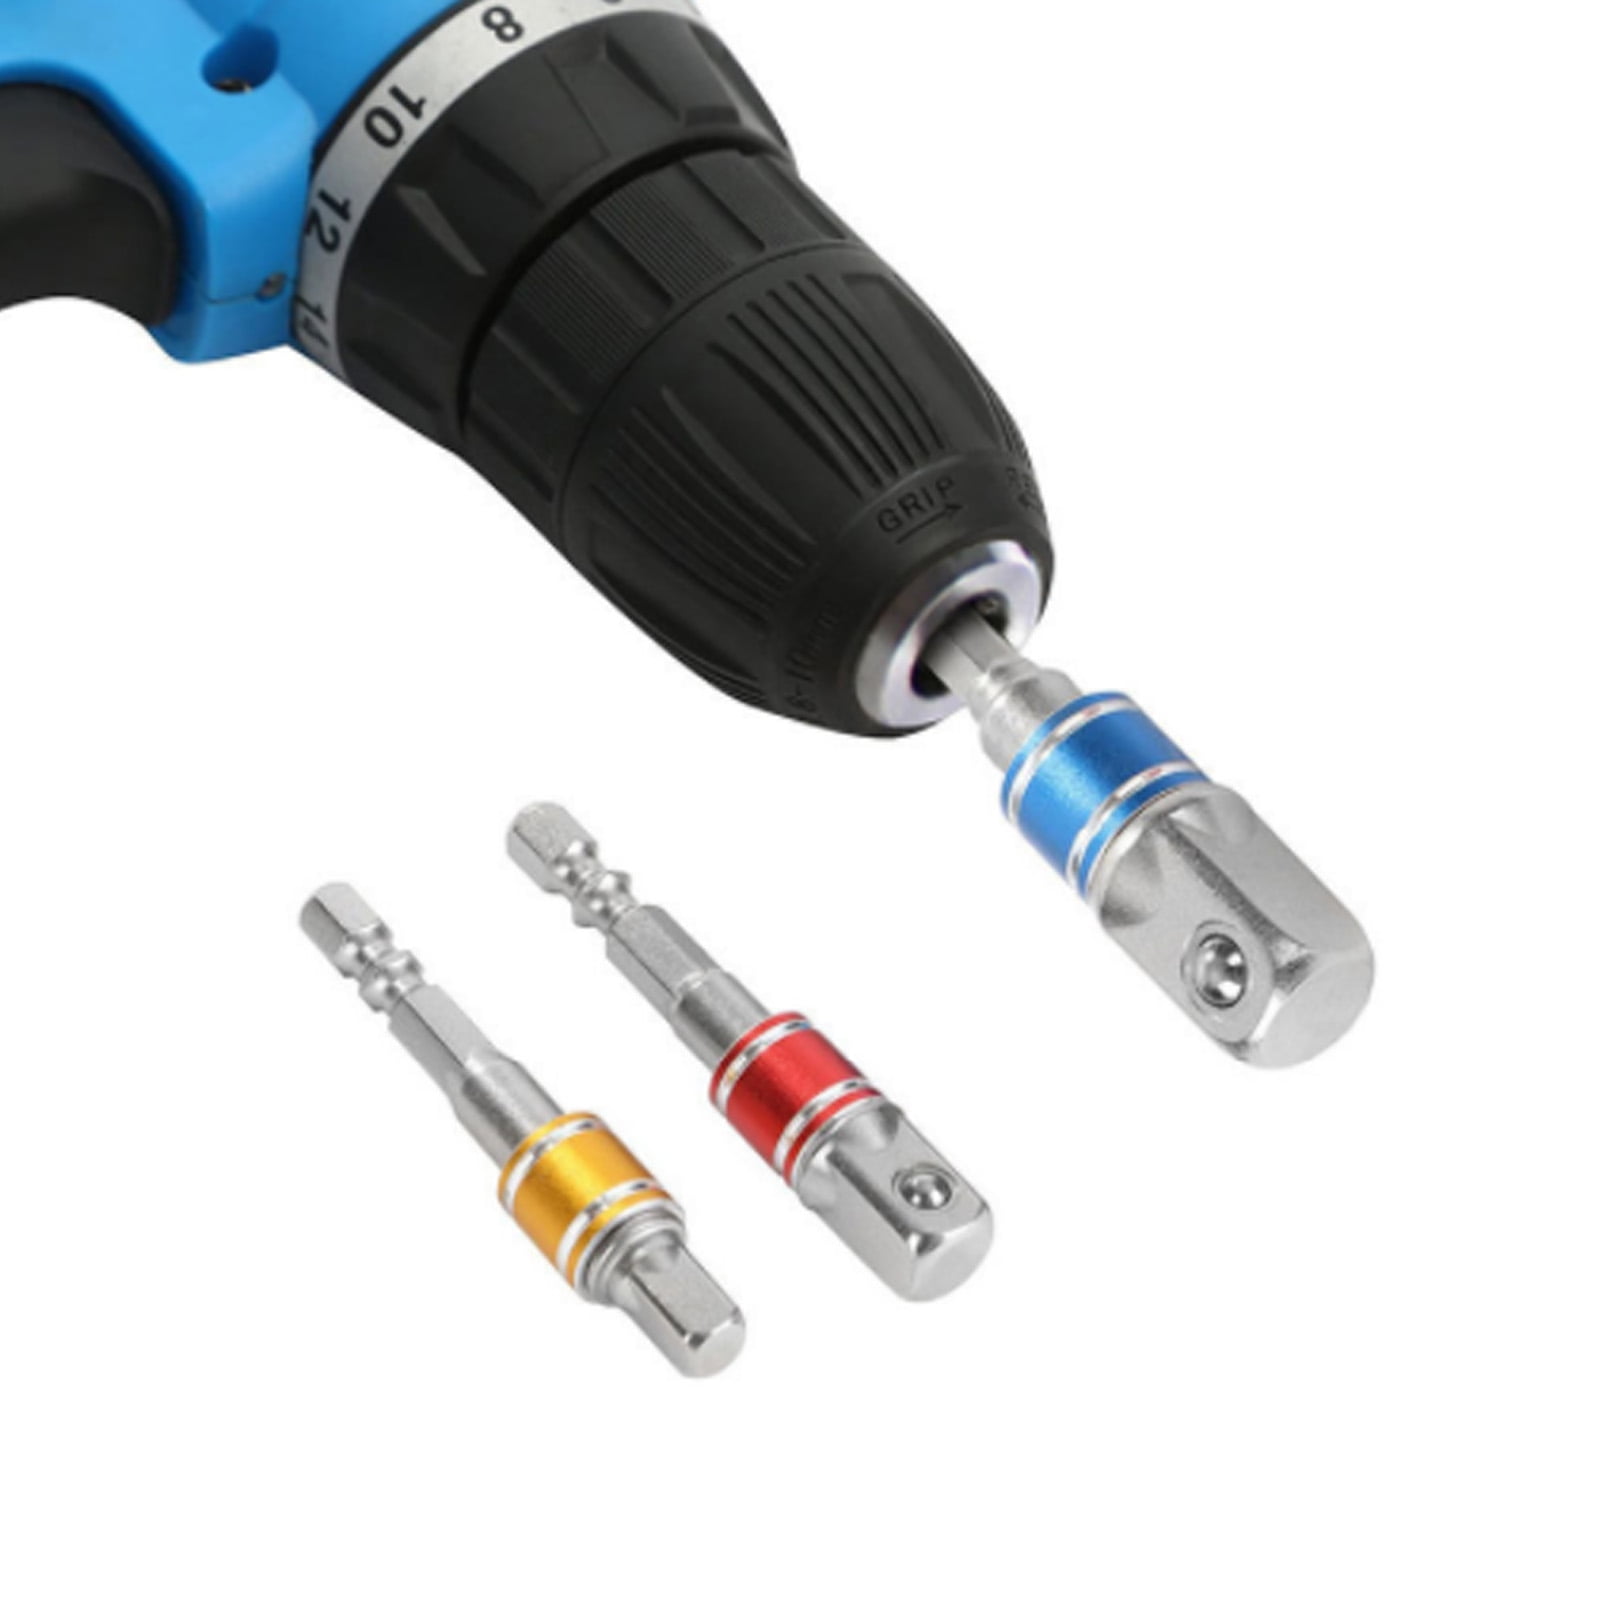 Impact Driver Socket Adapter Extension Set Turns Power Drill Into High Speed Nut Driver 1/4 3/8 1/2 Drive Turns Power Drill Into High Speed Nut Driver 1/4 3/8 1/2 Drive Eagglew Wrench Hex Shank Drill Bits Bar 